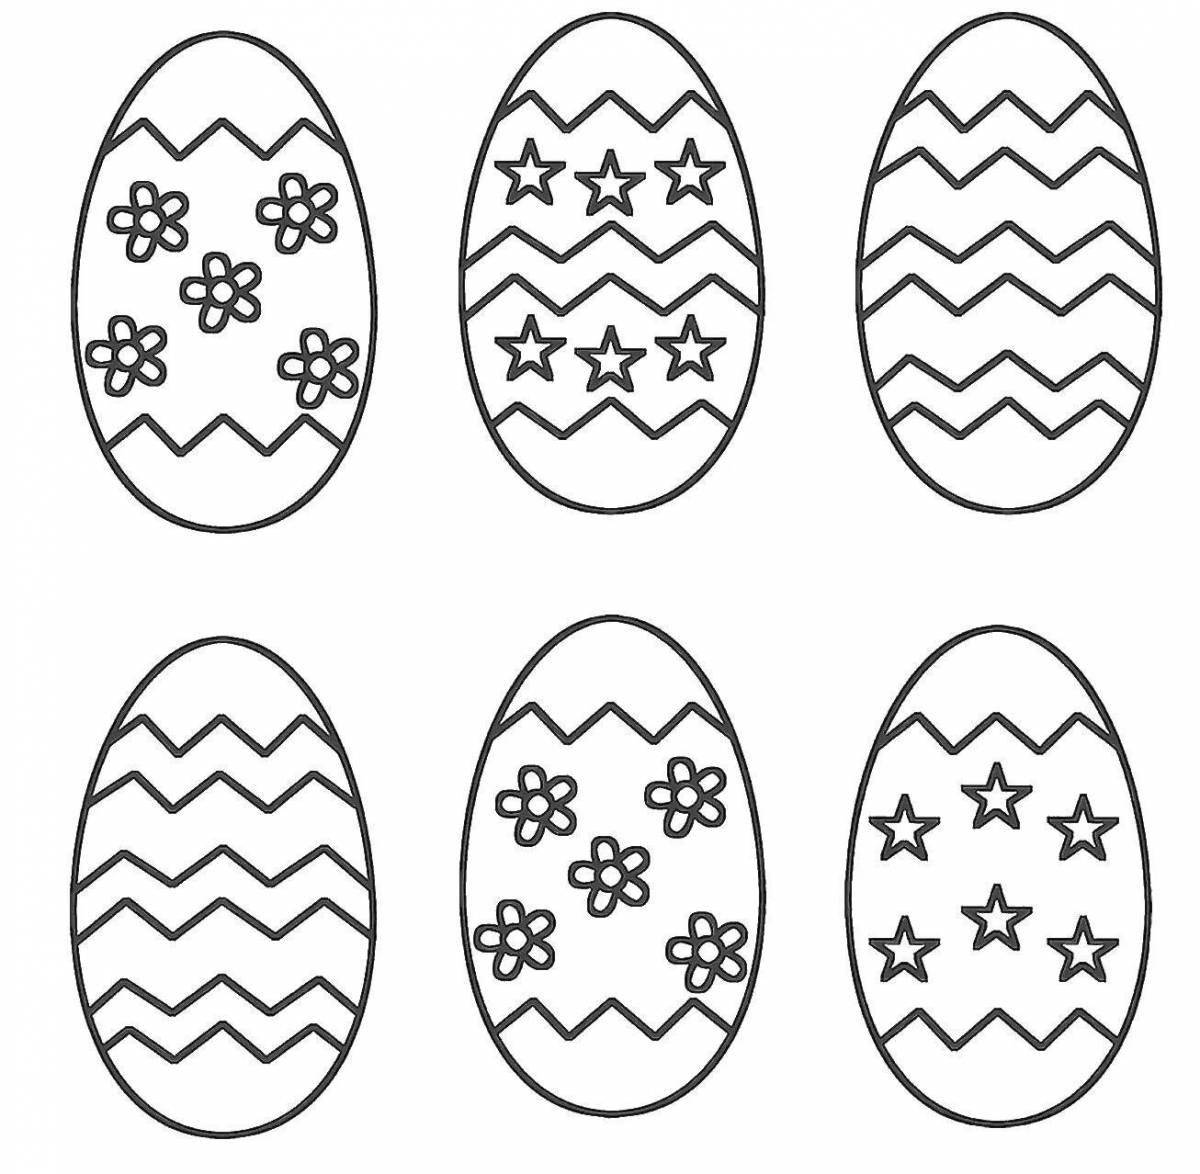 Adorable easter egg coloring page